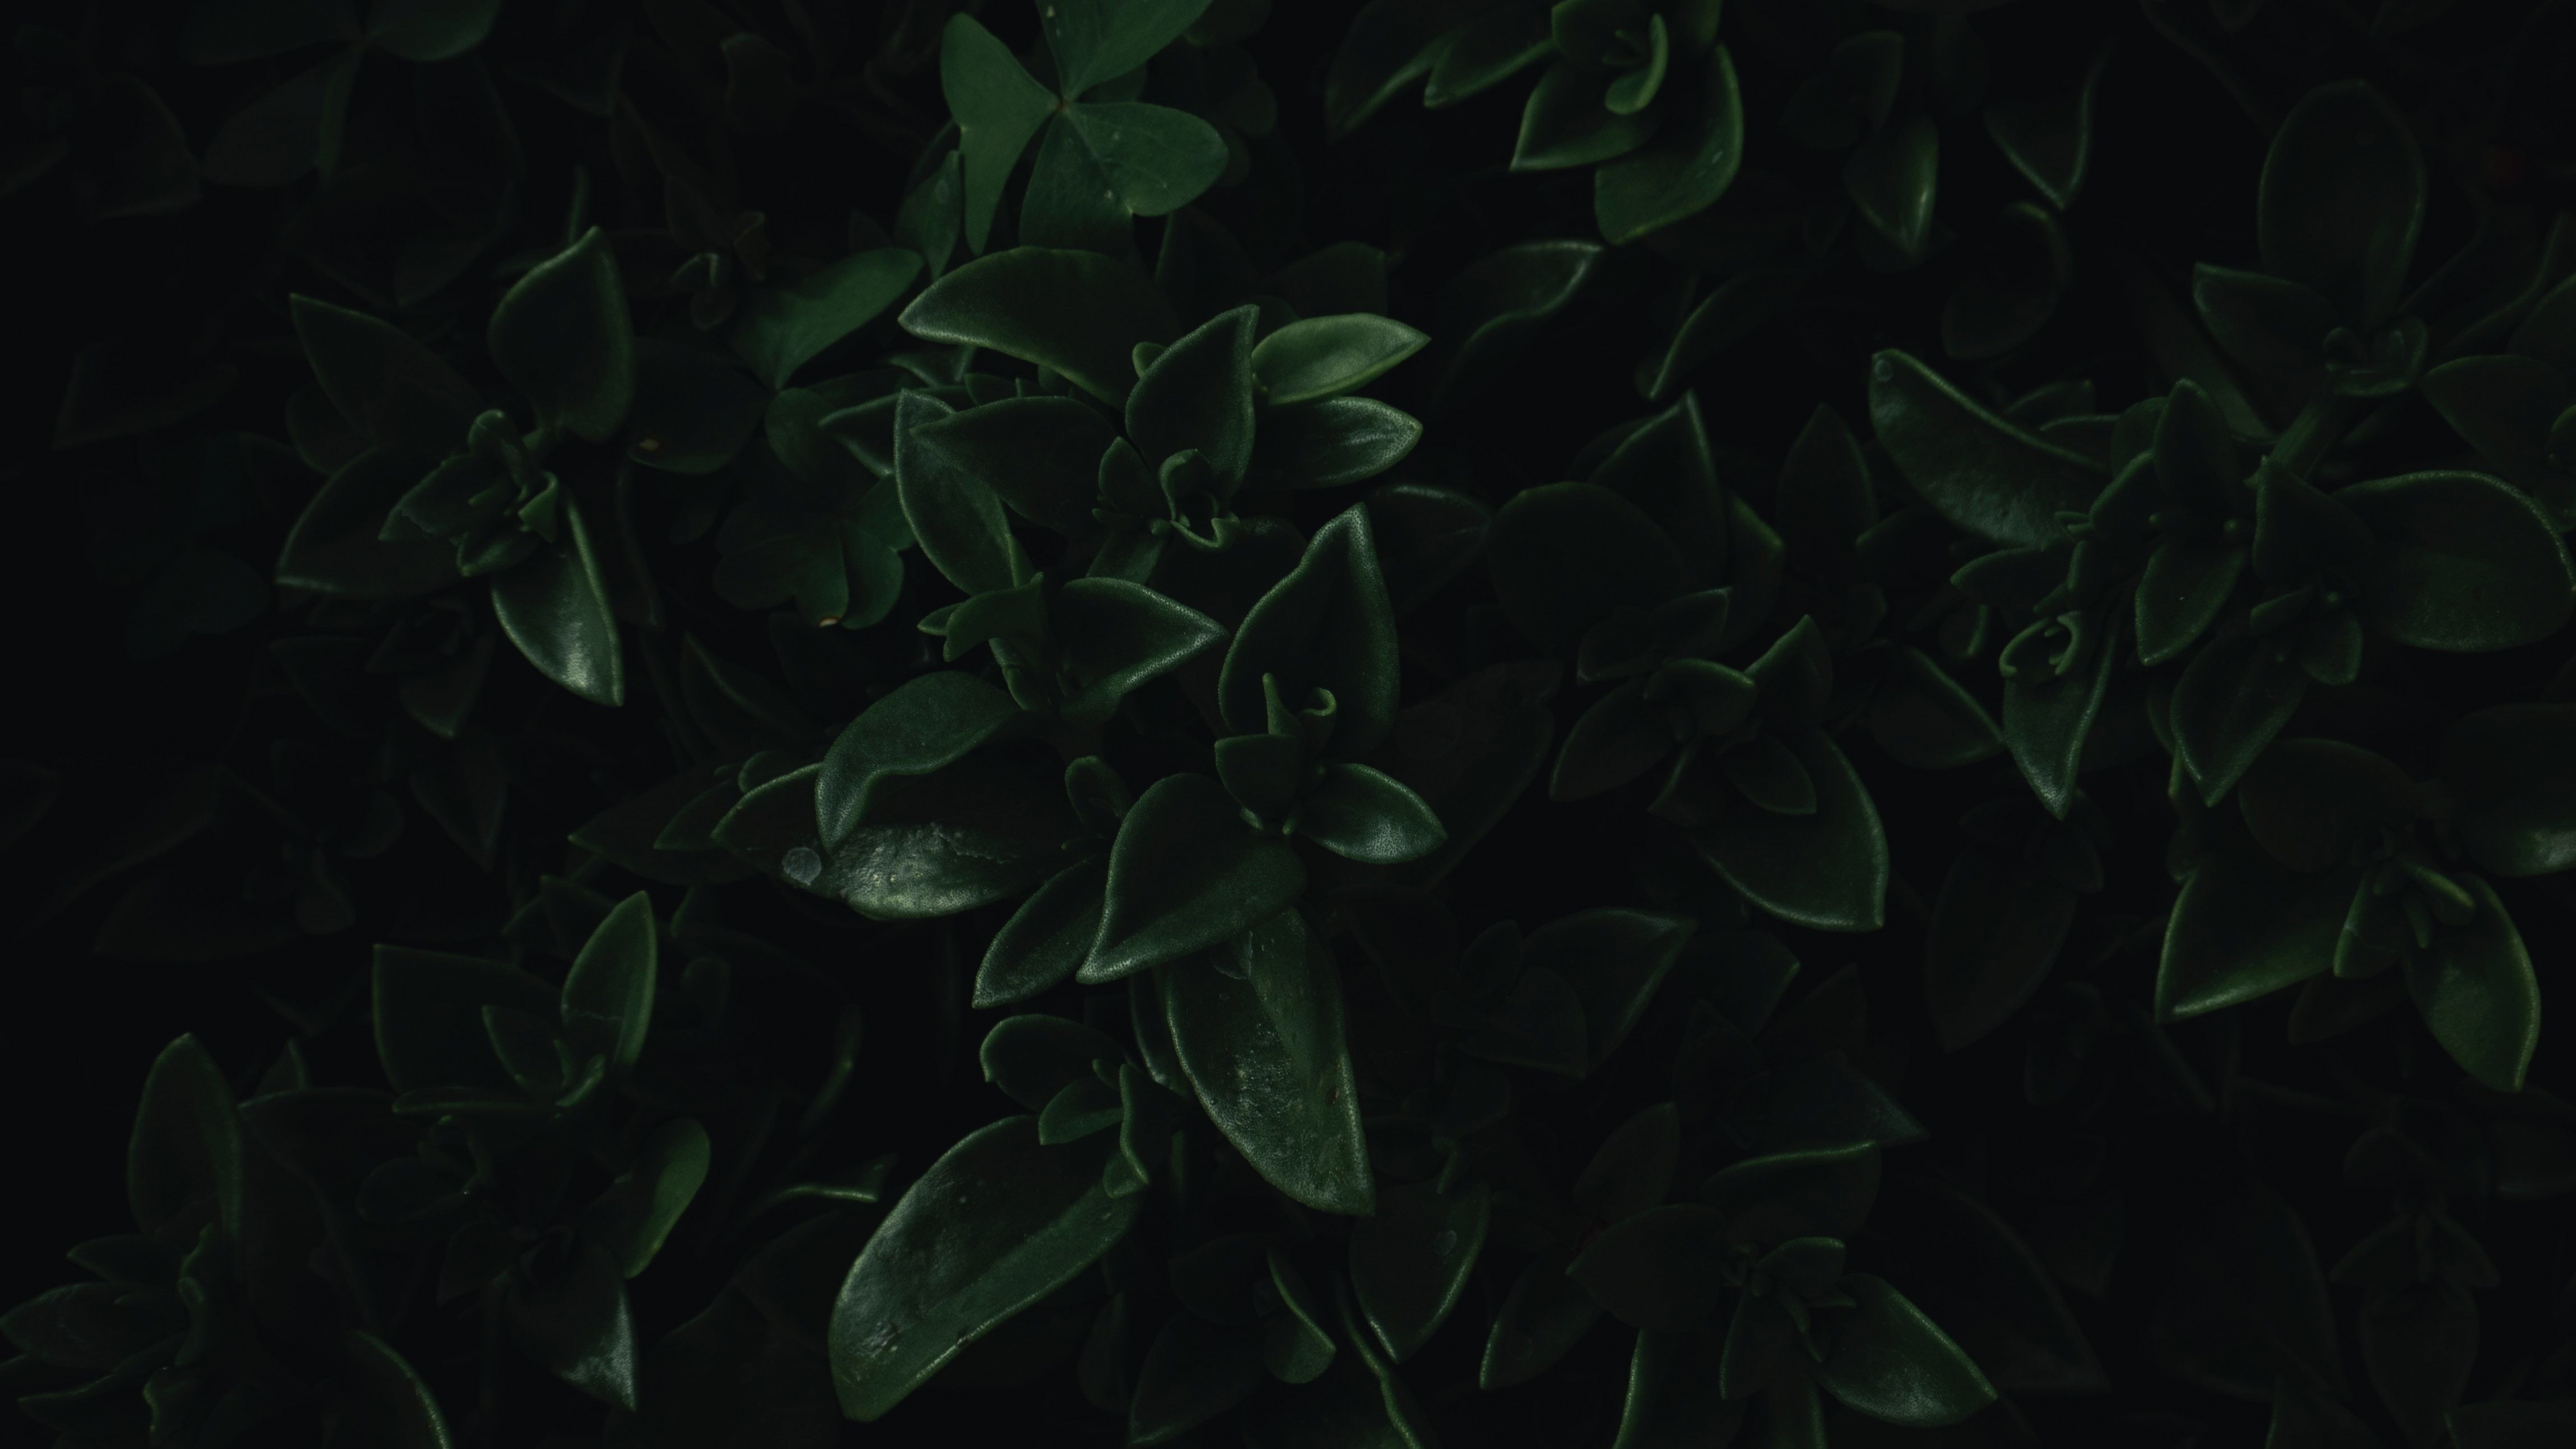 Download wallpaper 3840x2160 green leaves, close up, dark, portrait 4k  wallpaper, uhd wallpaper, 16:9 widescreen 3840x2160 hd background, 18806